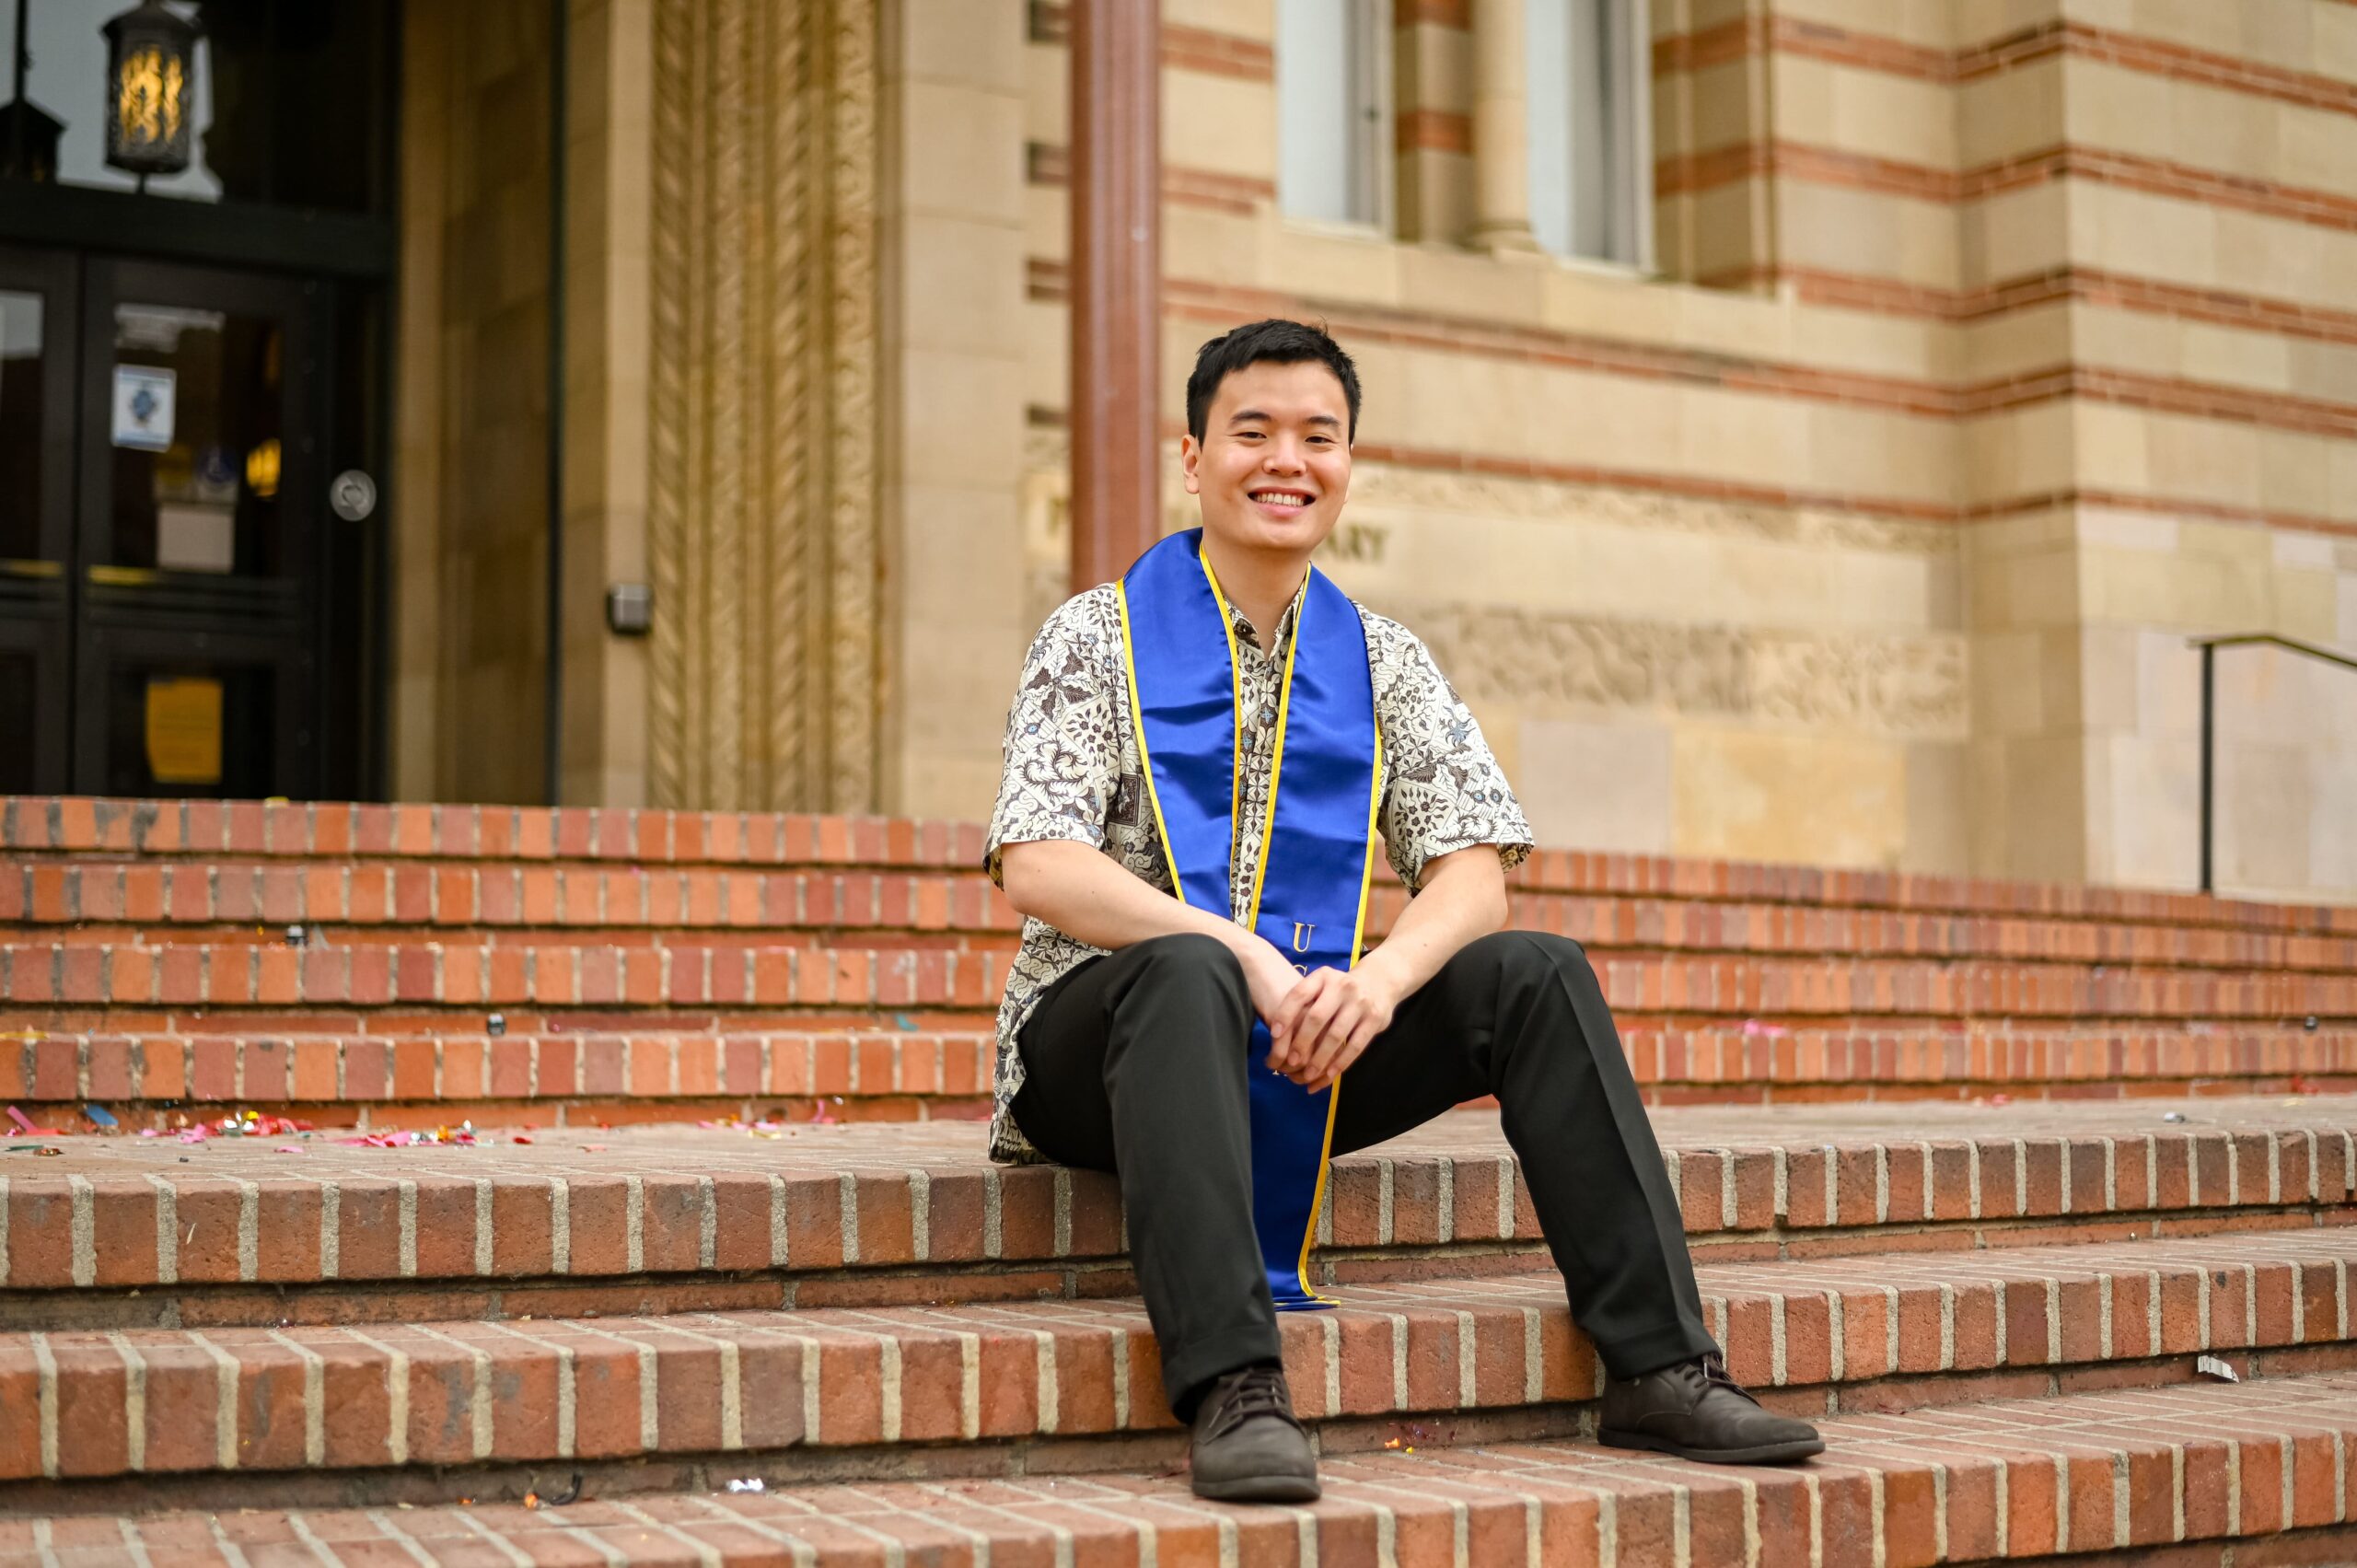 Jason sitting down on a set of stairs and wearing a stole in honor of his graduation from the University of California, Los Angeles.